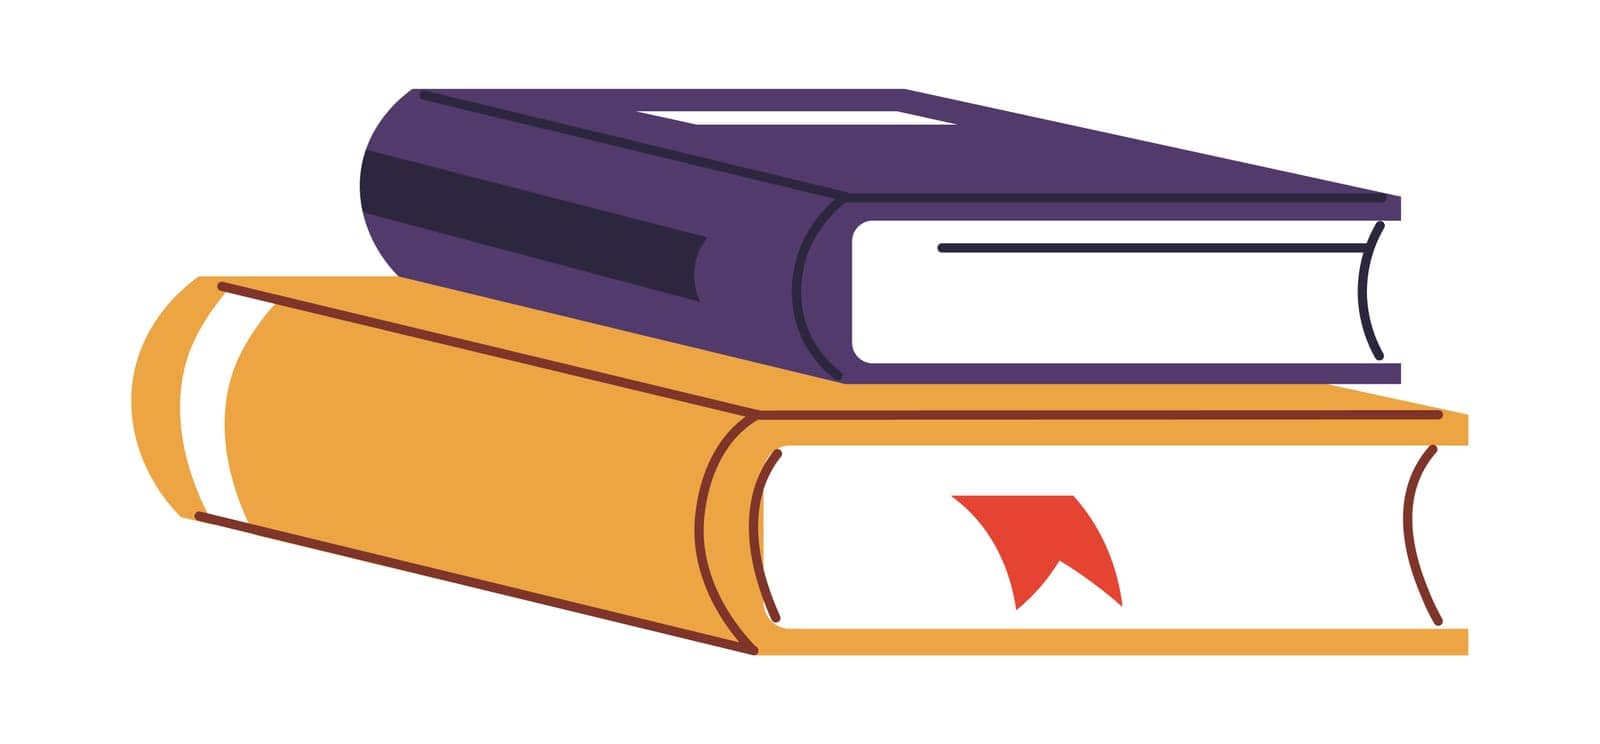 Textbook pile, isolated school or university books for learning and studying. Obtaining knowledge and educating, lessons and classes, disciplines and publications for help. Vector in flat style